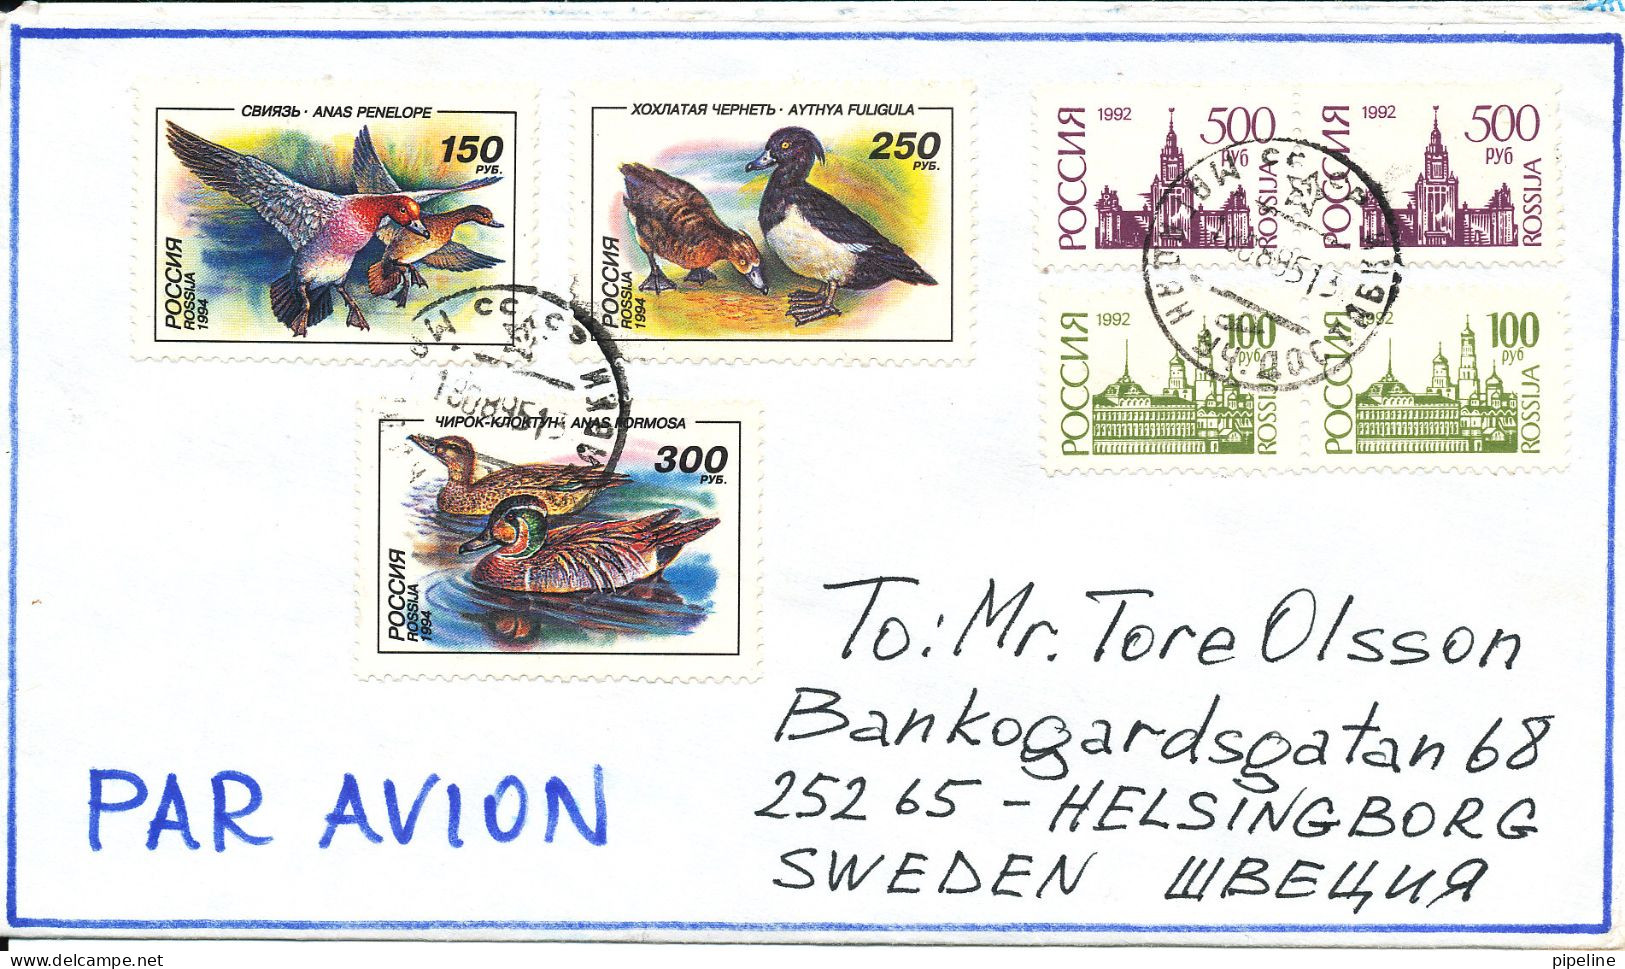 Russia Very Nice And Good Franked Cover Sent To Sweden 18-8-1995 - Covers & Documents